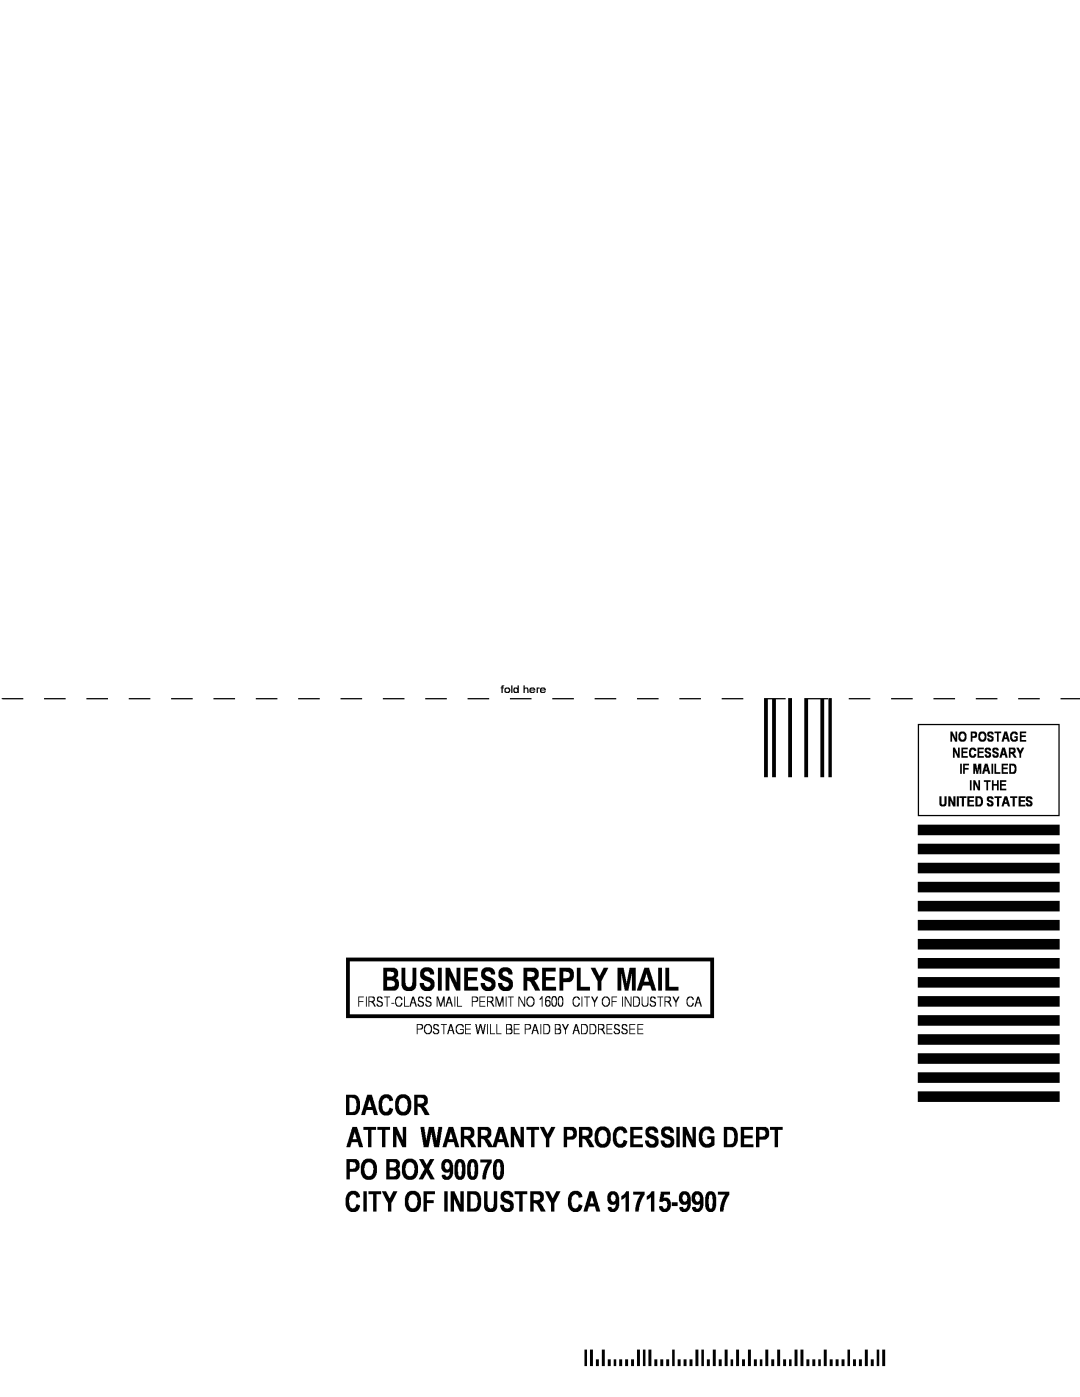 Sears ER30GI manual Business Reply Mail, Dacor Attn Warranty Processing Dept Po Box City Of Industry Ca, fold here 